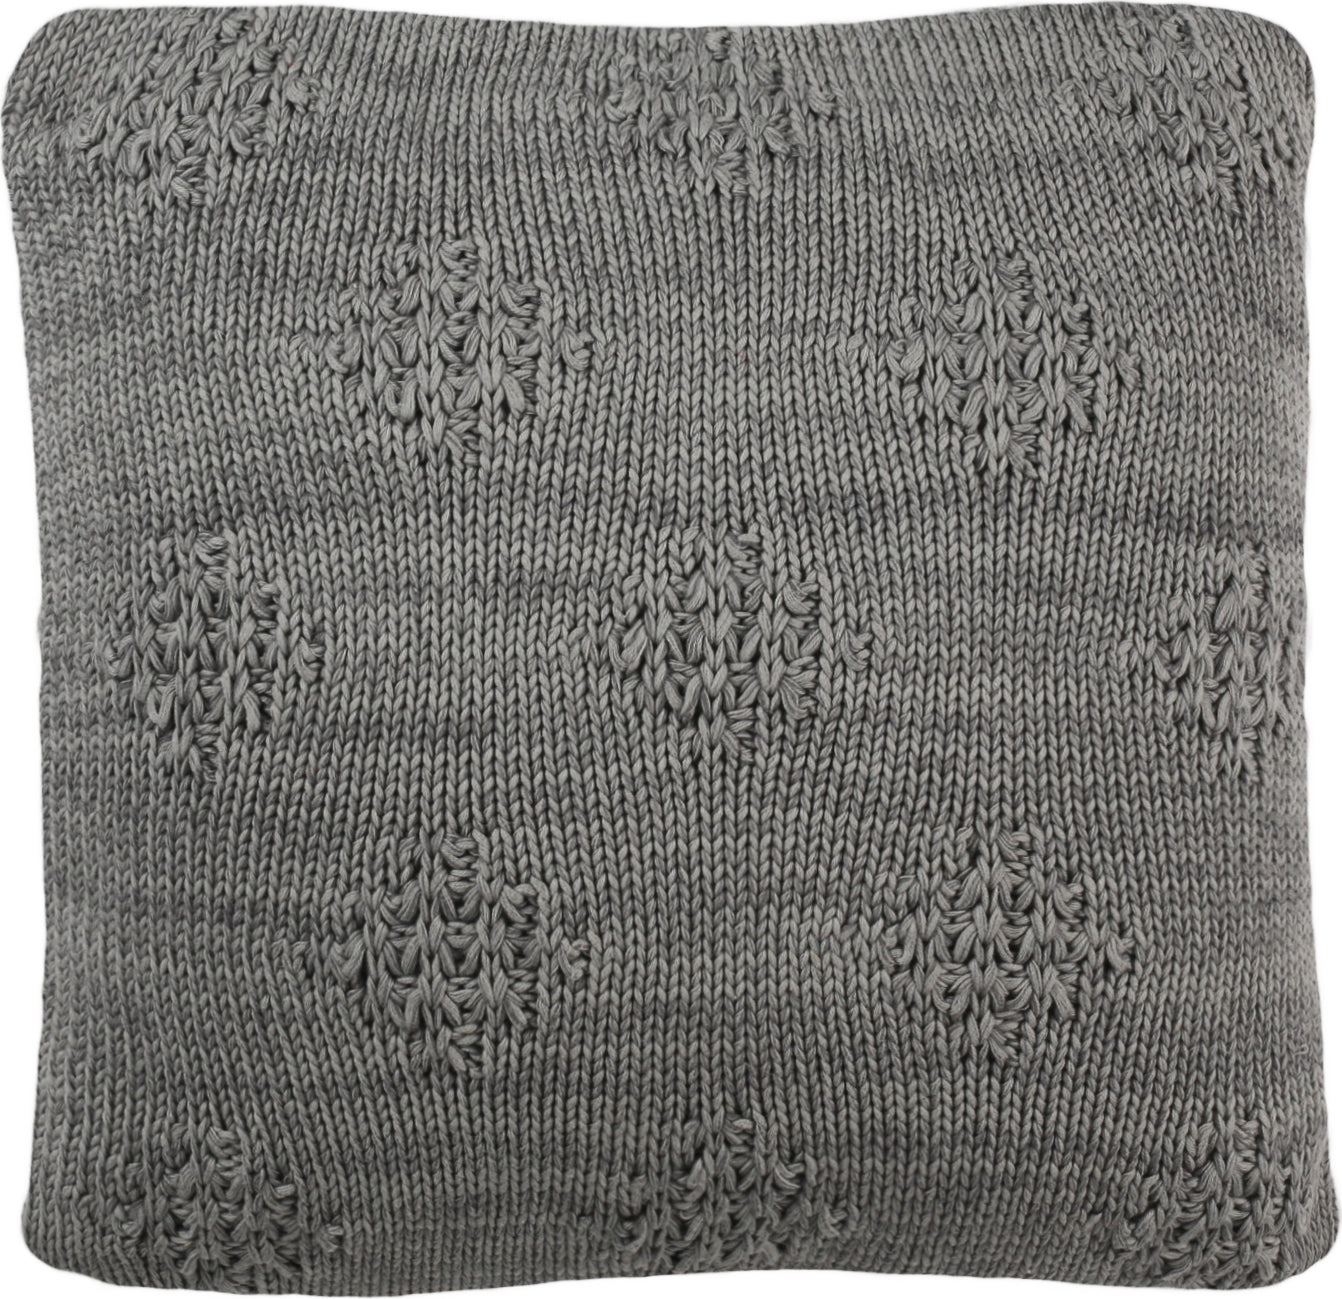 Safavieh Affinity Knit Textures and Weaves Dark Grey main image